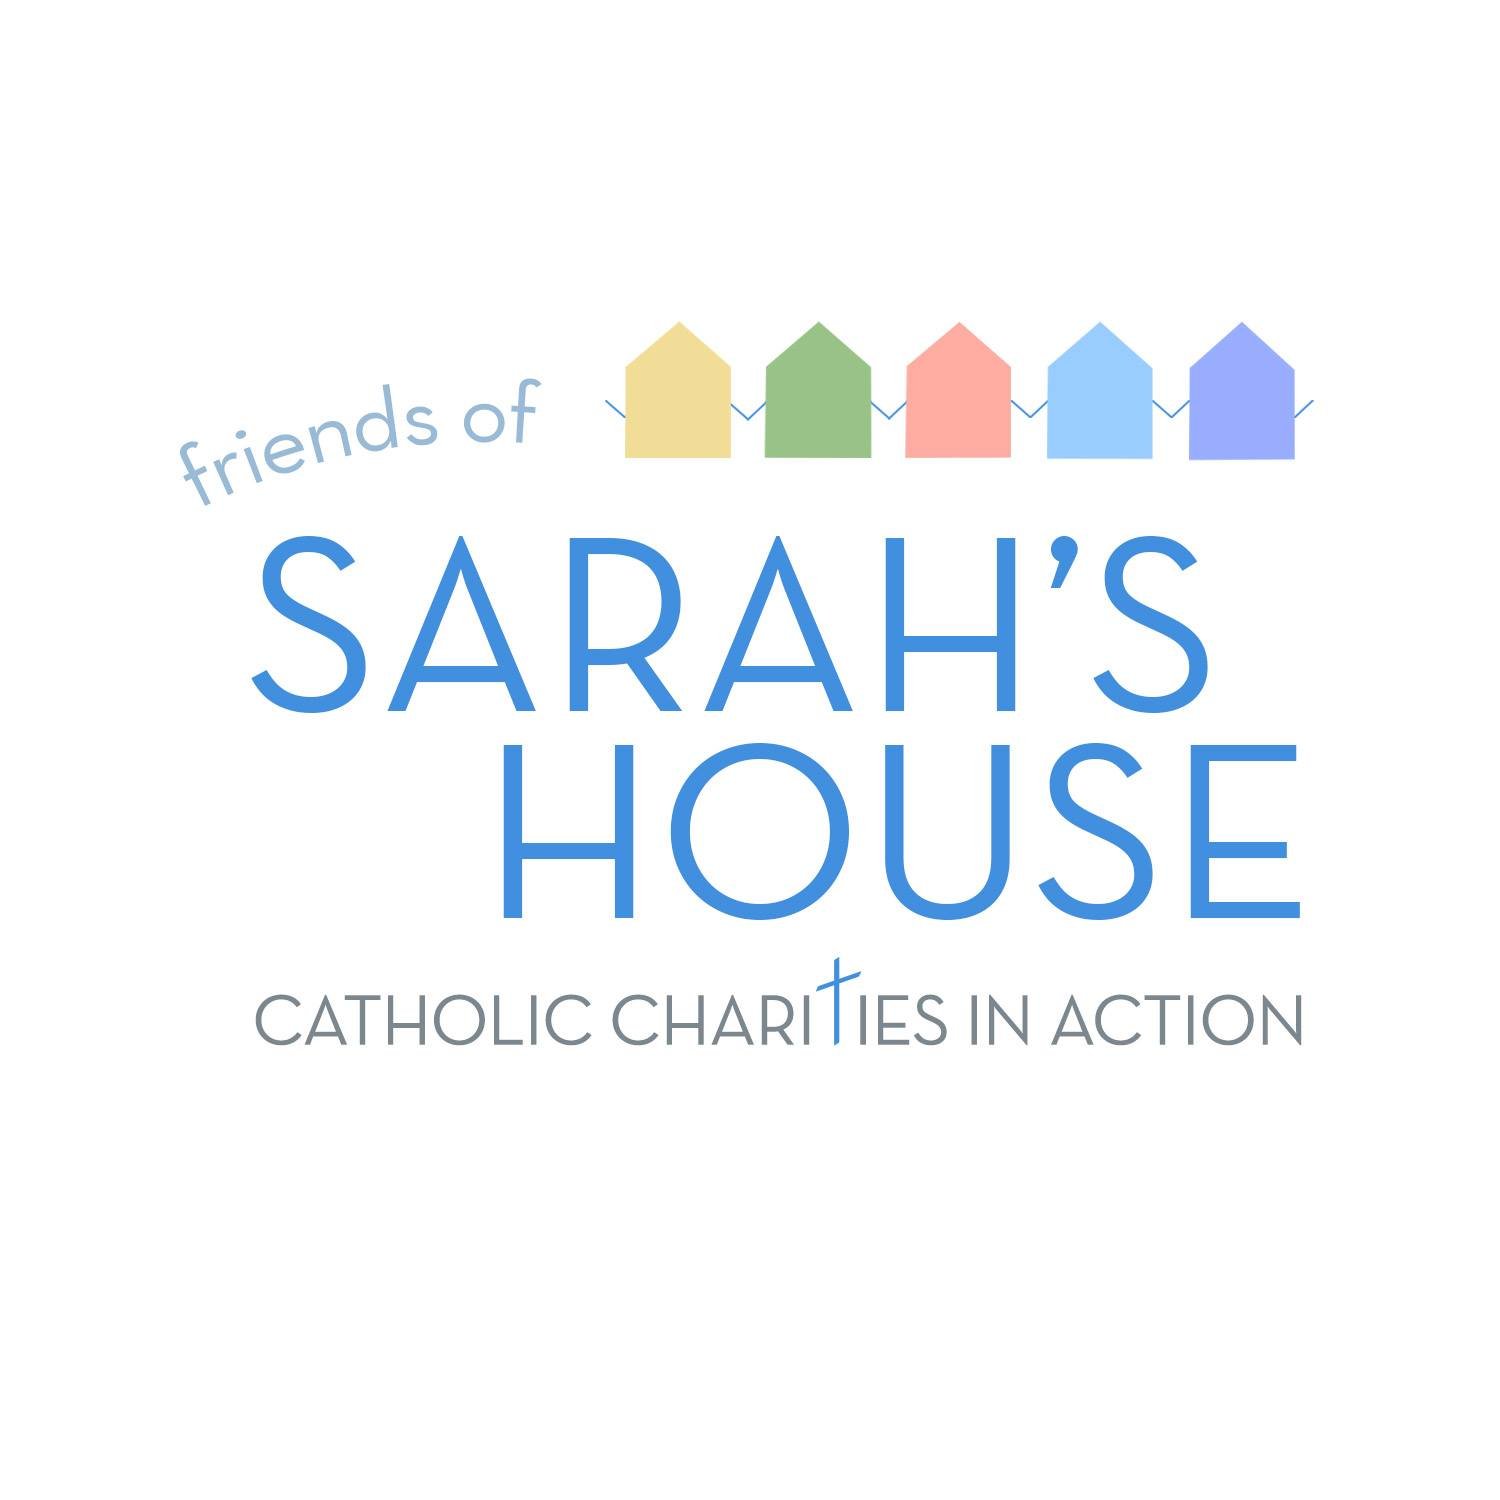 Friends of Sarah's House